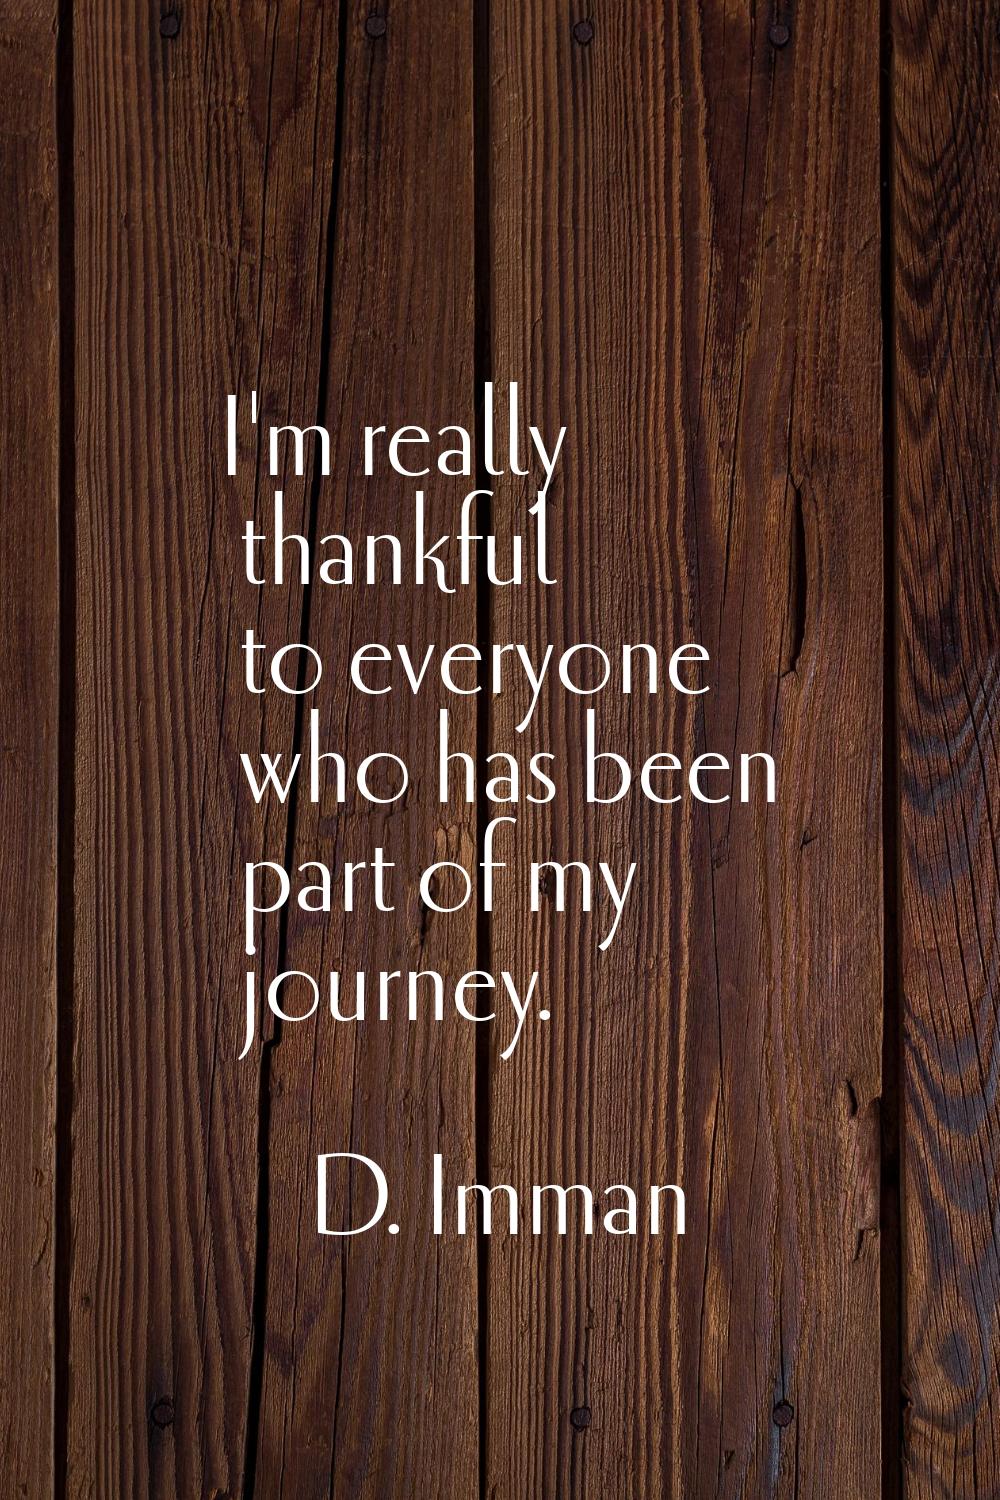 I'm really thankful to everyone who has been part of my journey.